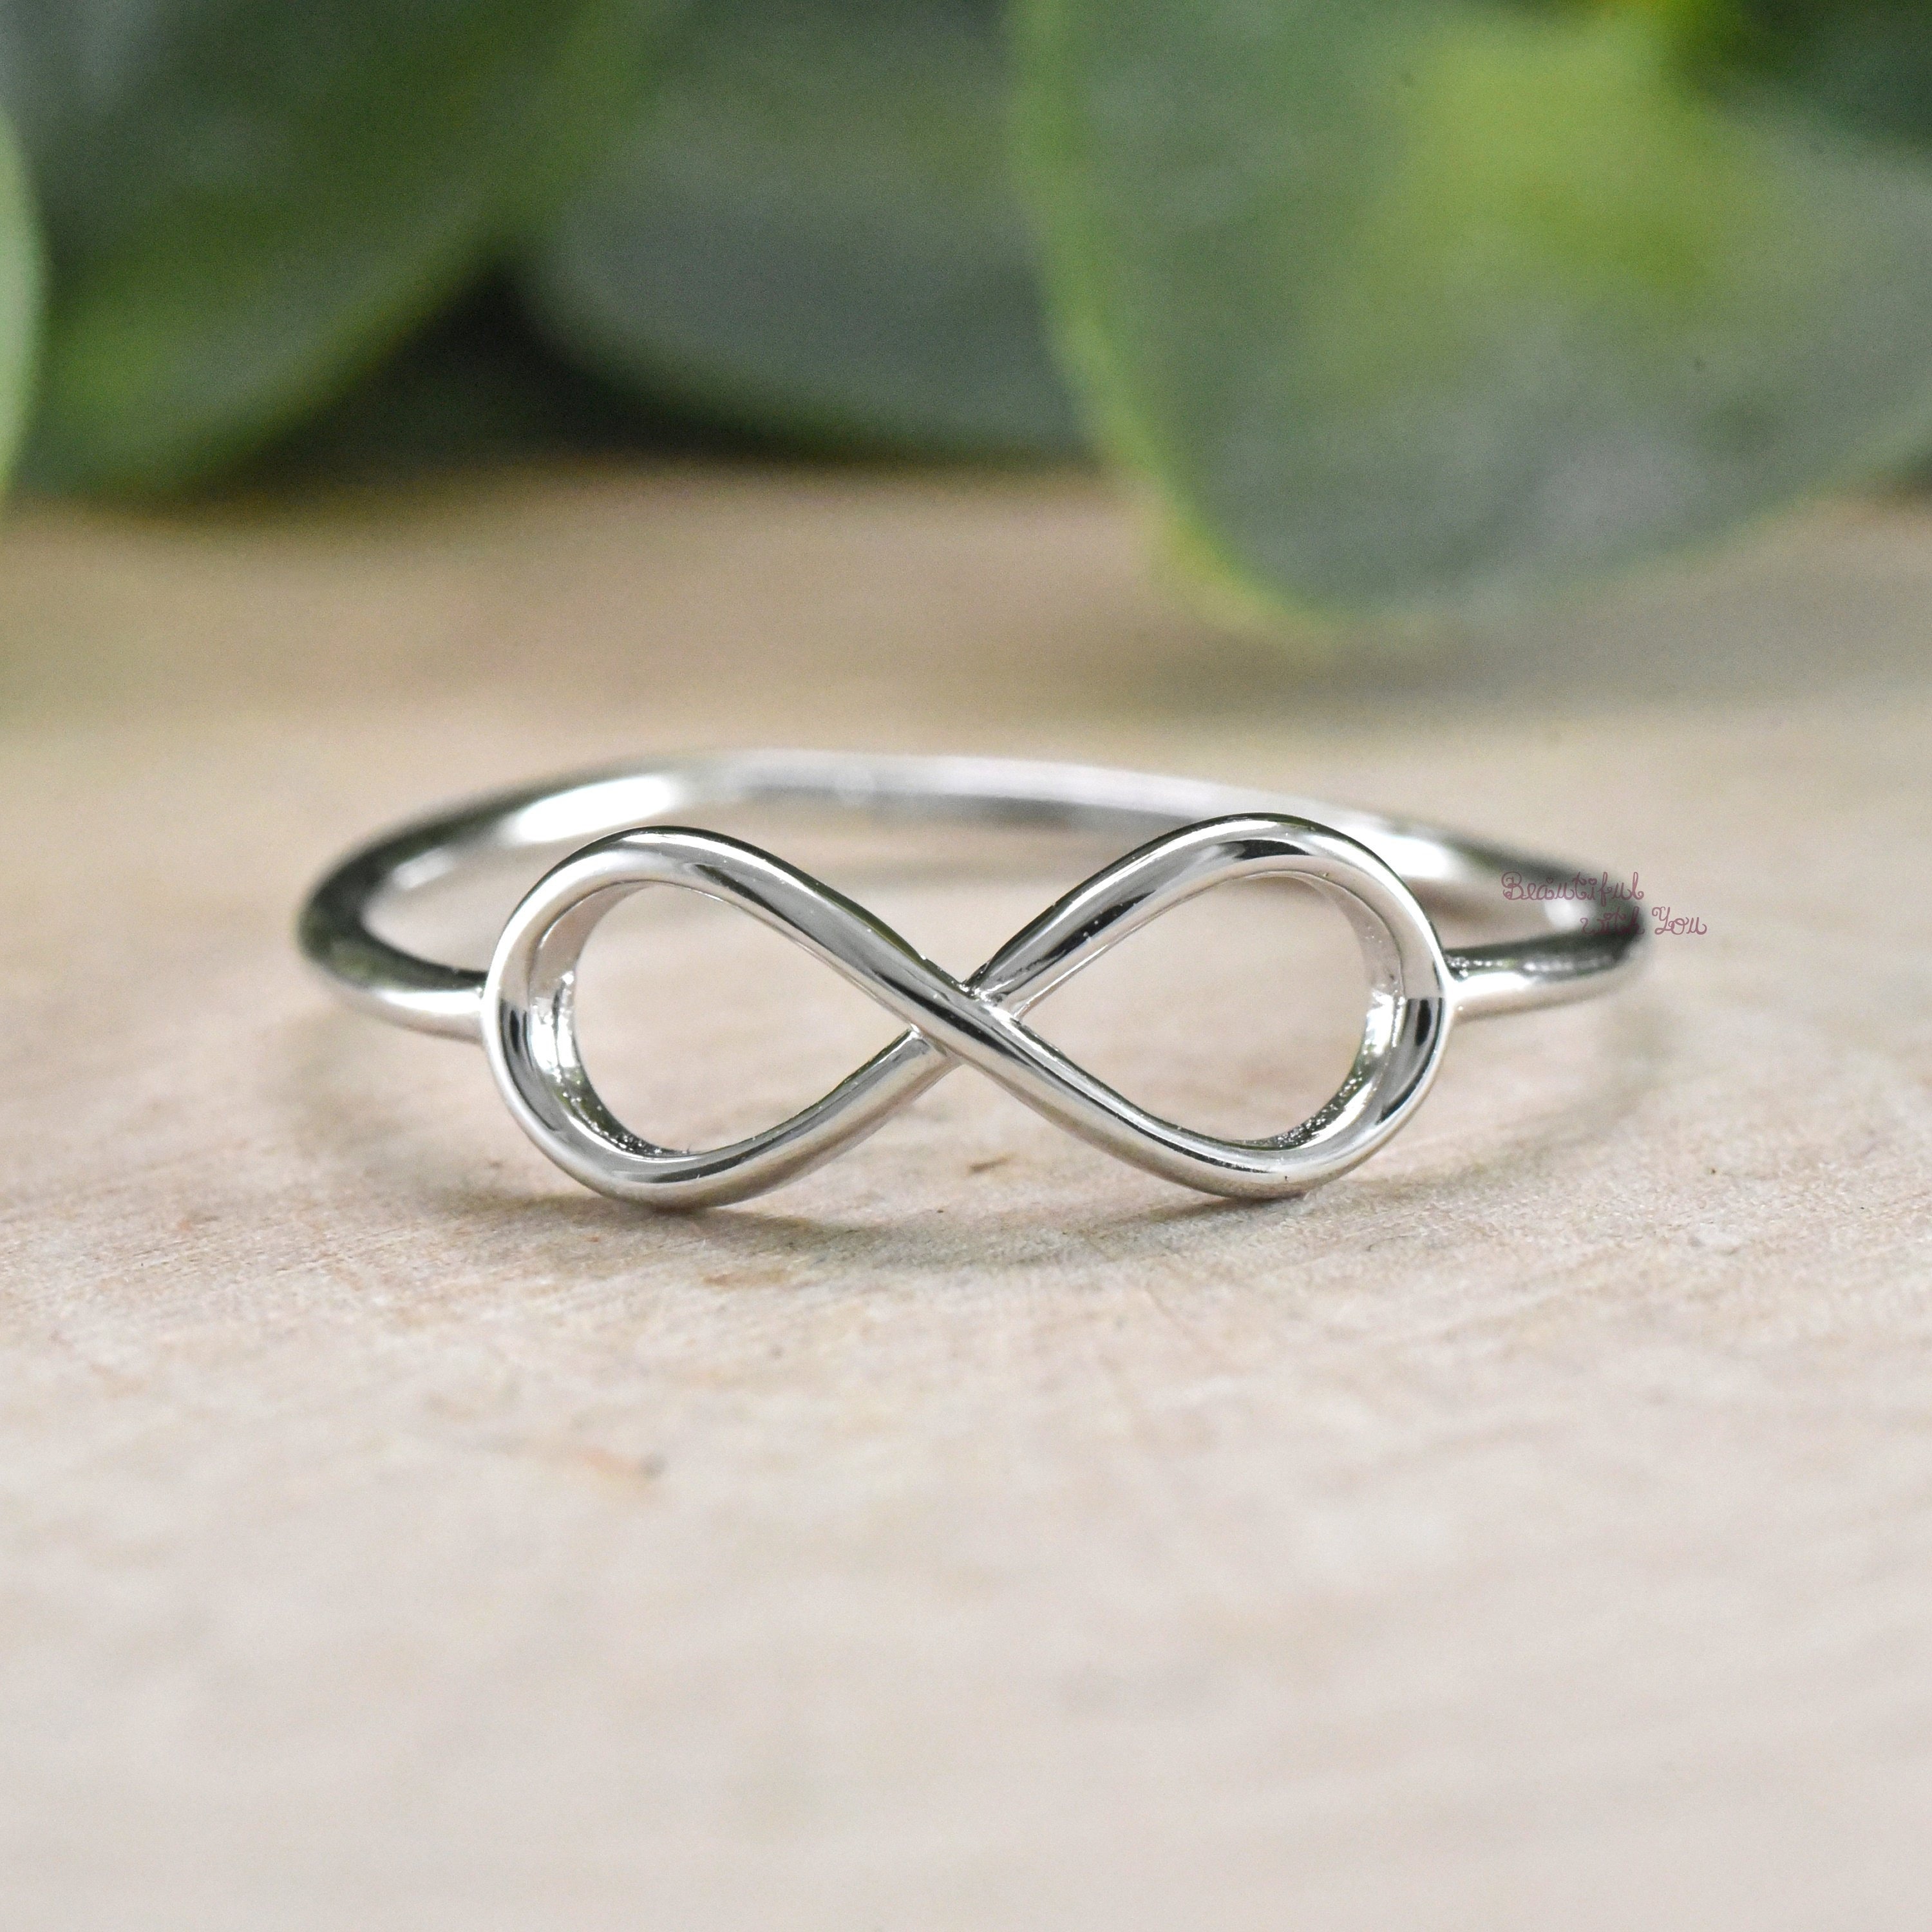 Silver Infinity Skinny Thin Ring-925 Sterling Silver Ring-Infinite Love Wire Ring-Midi Ring-Promise Ring-Celtic Silver Ring-Gifts For Her